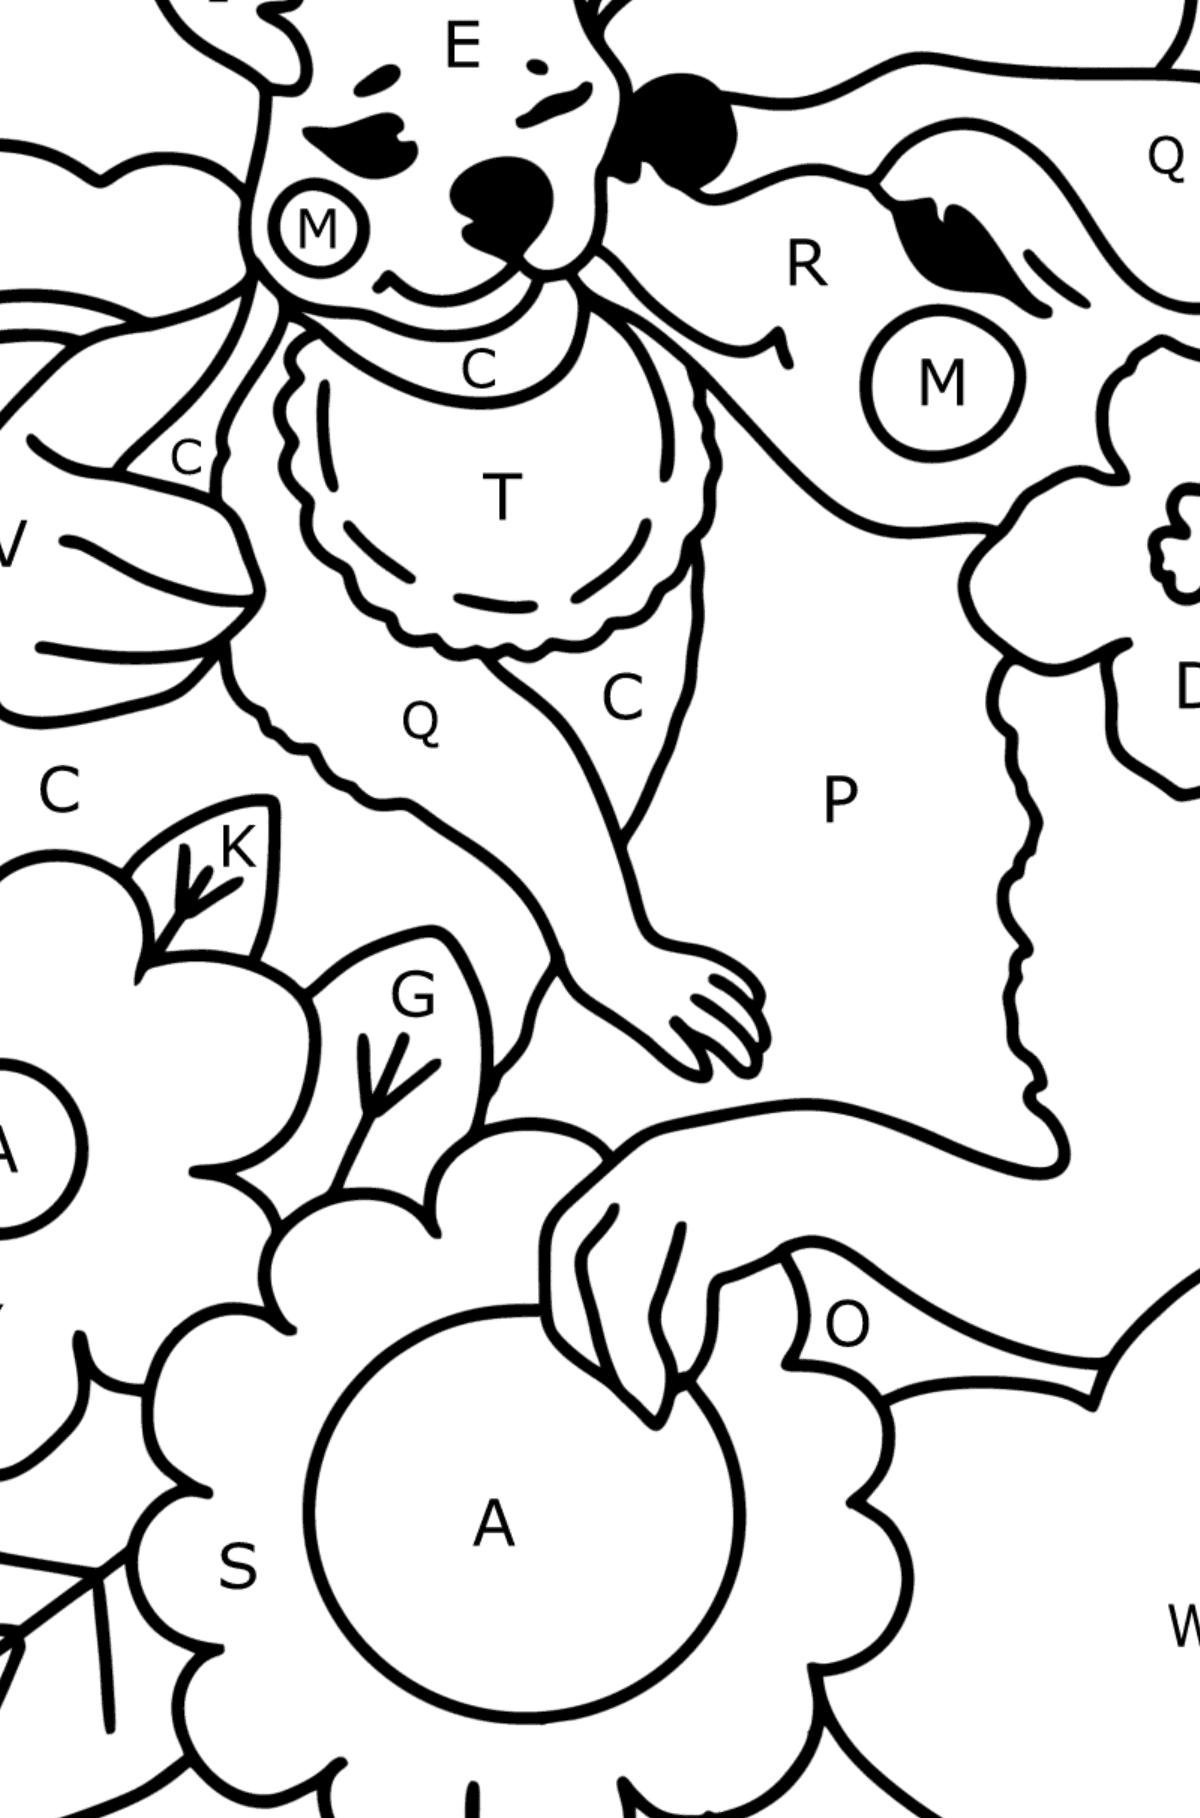 Coloring page Kangaroo Mother's Day Card - Coloring by Letters for Kids